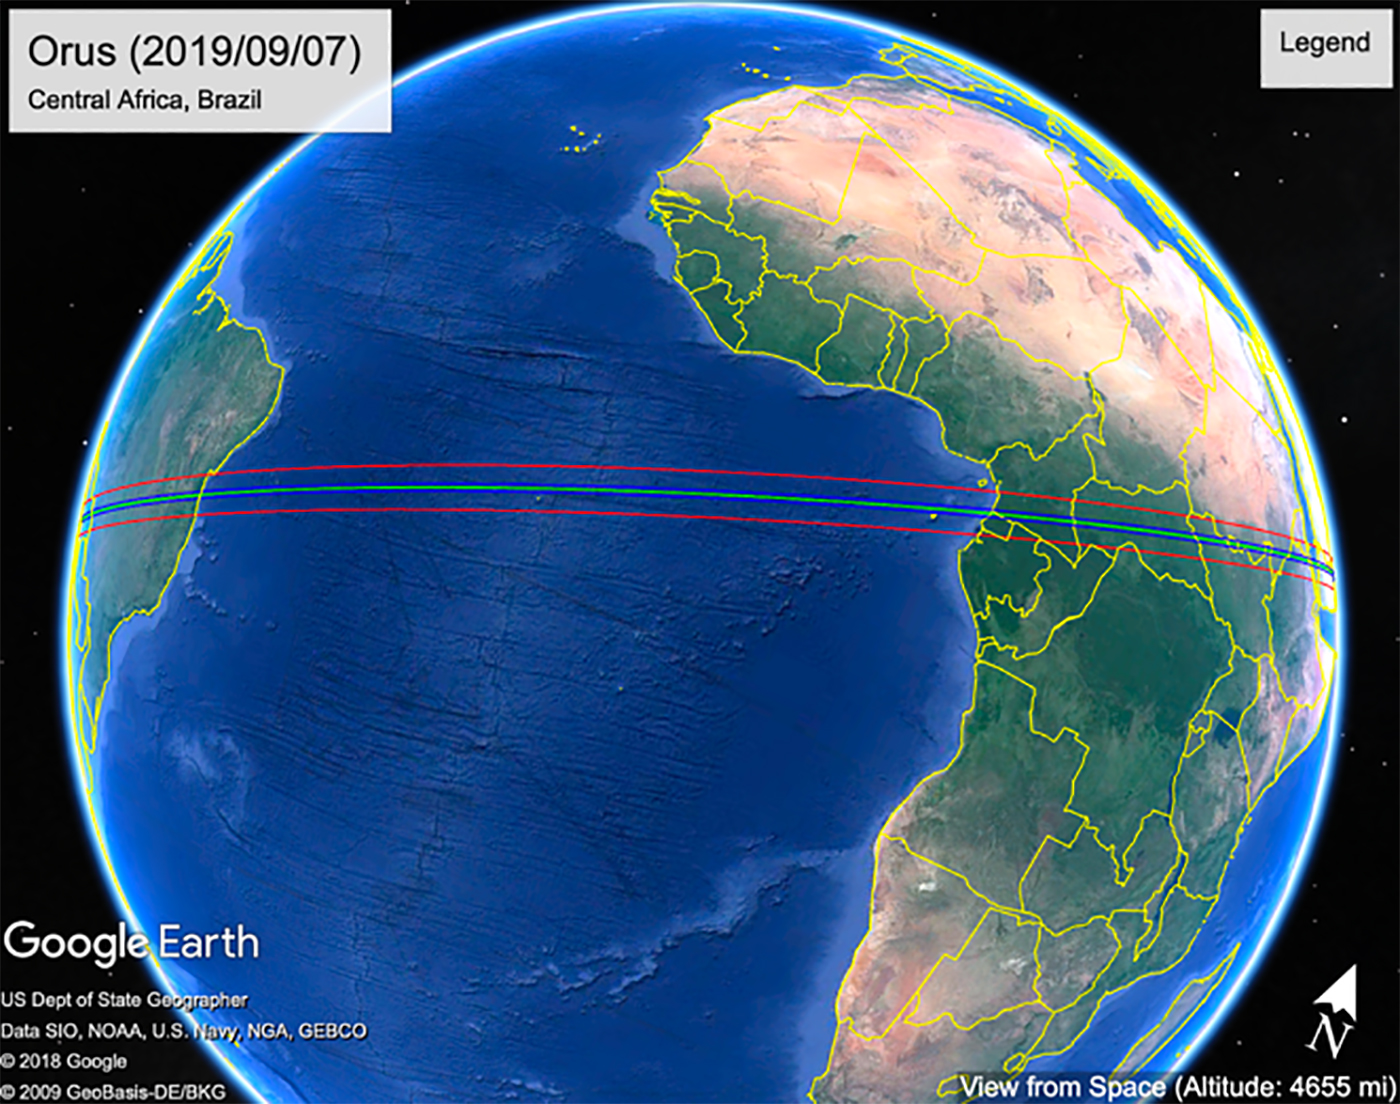 Google Earth Screenshot of Ours 9-7-2019 around Central Africa and Brazil